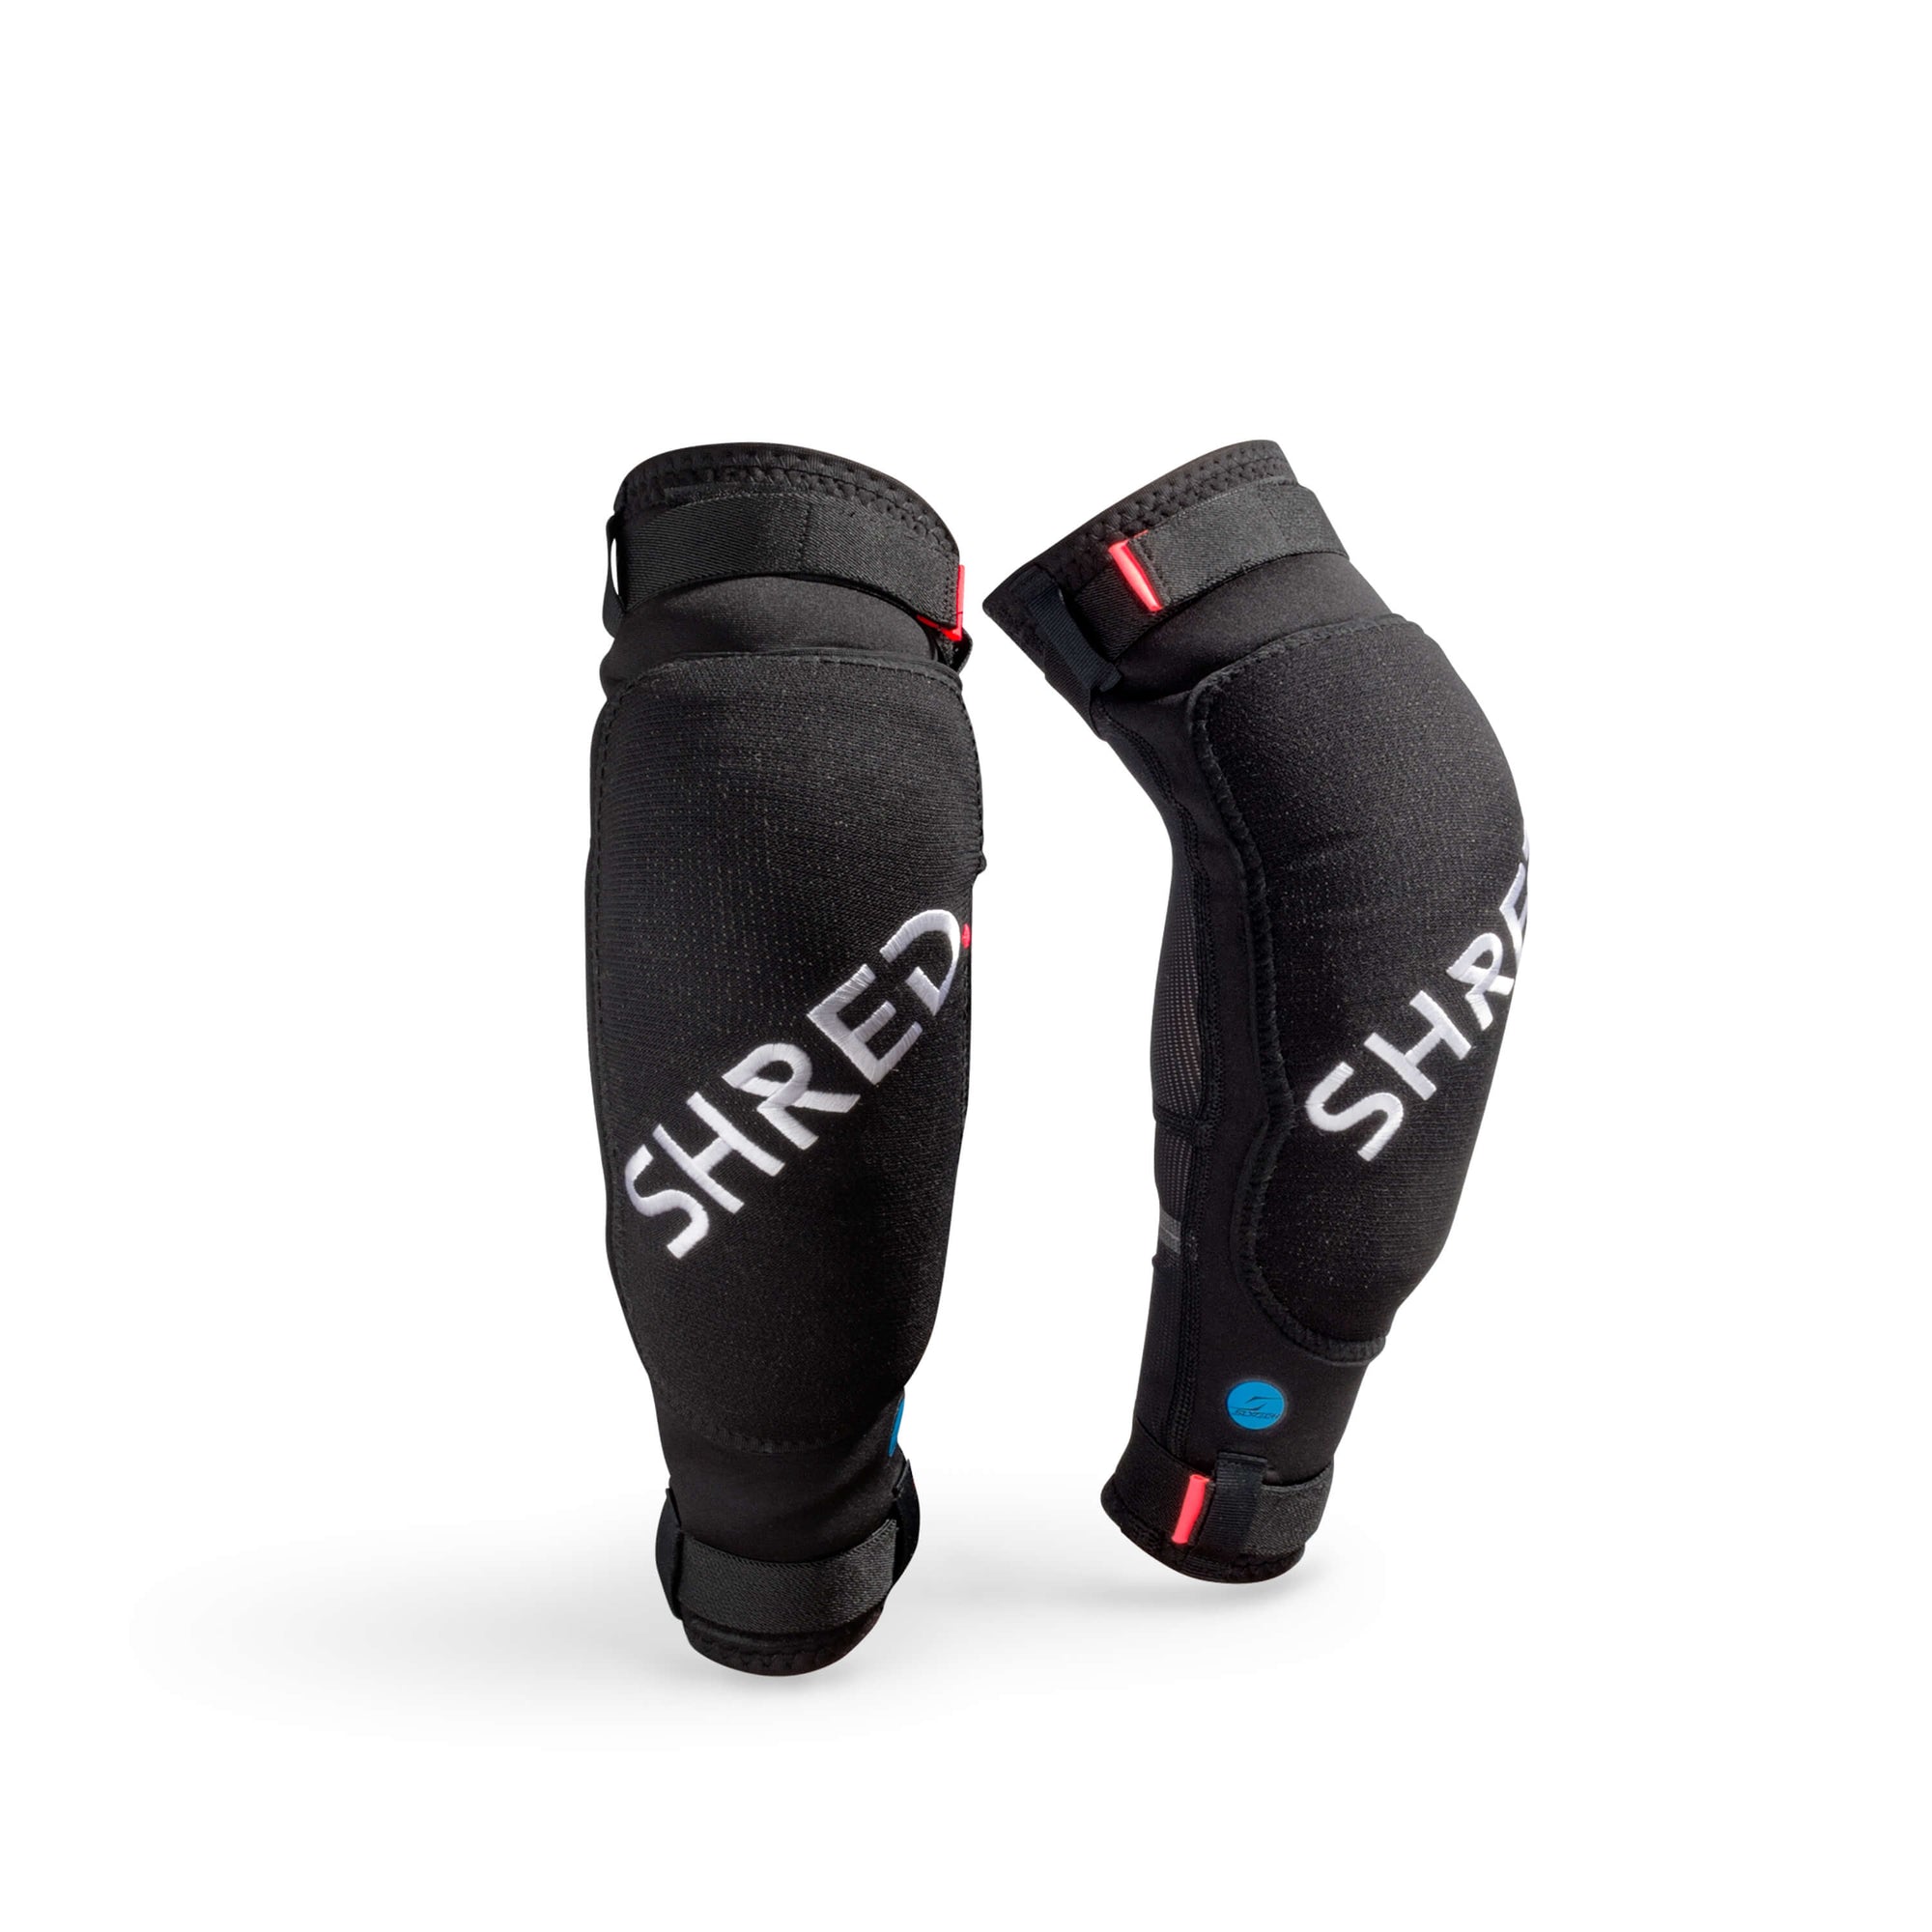 Noshock Elbow Pads Heavy Duty - Mtb Knee-Elbow Pads|PDNEHJ11L,PDNEHJ11M,PDNEHJ11S